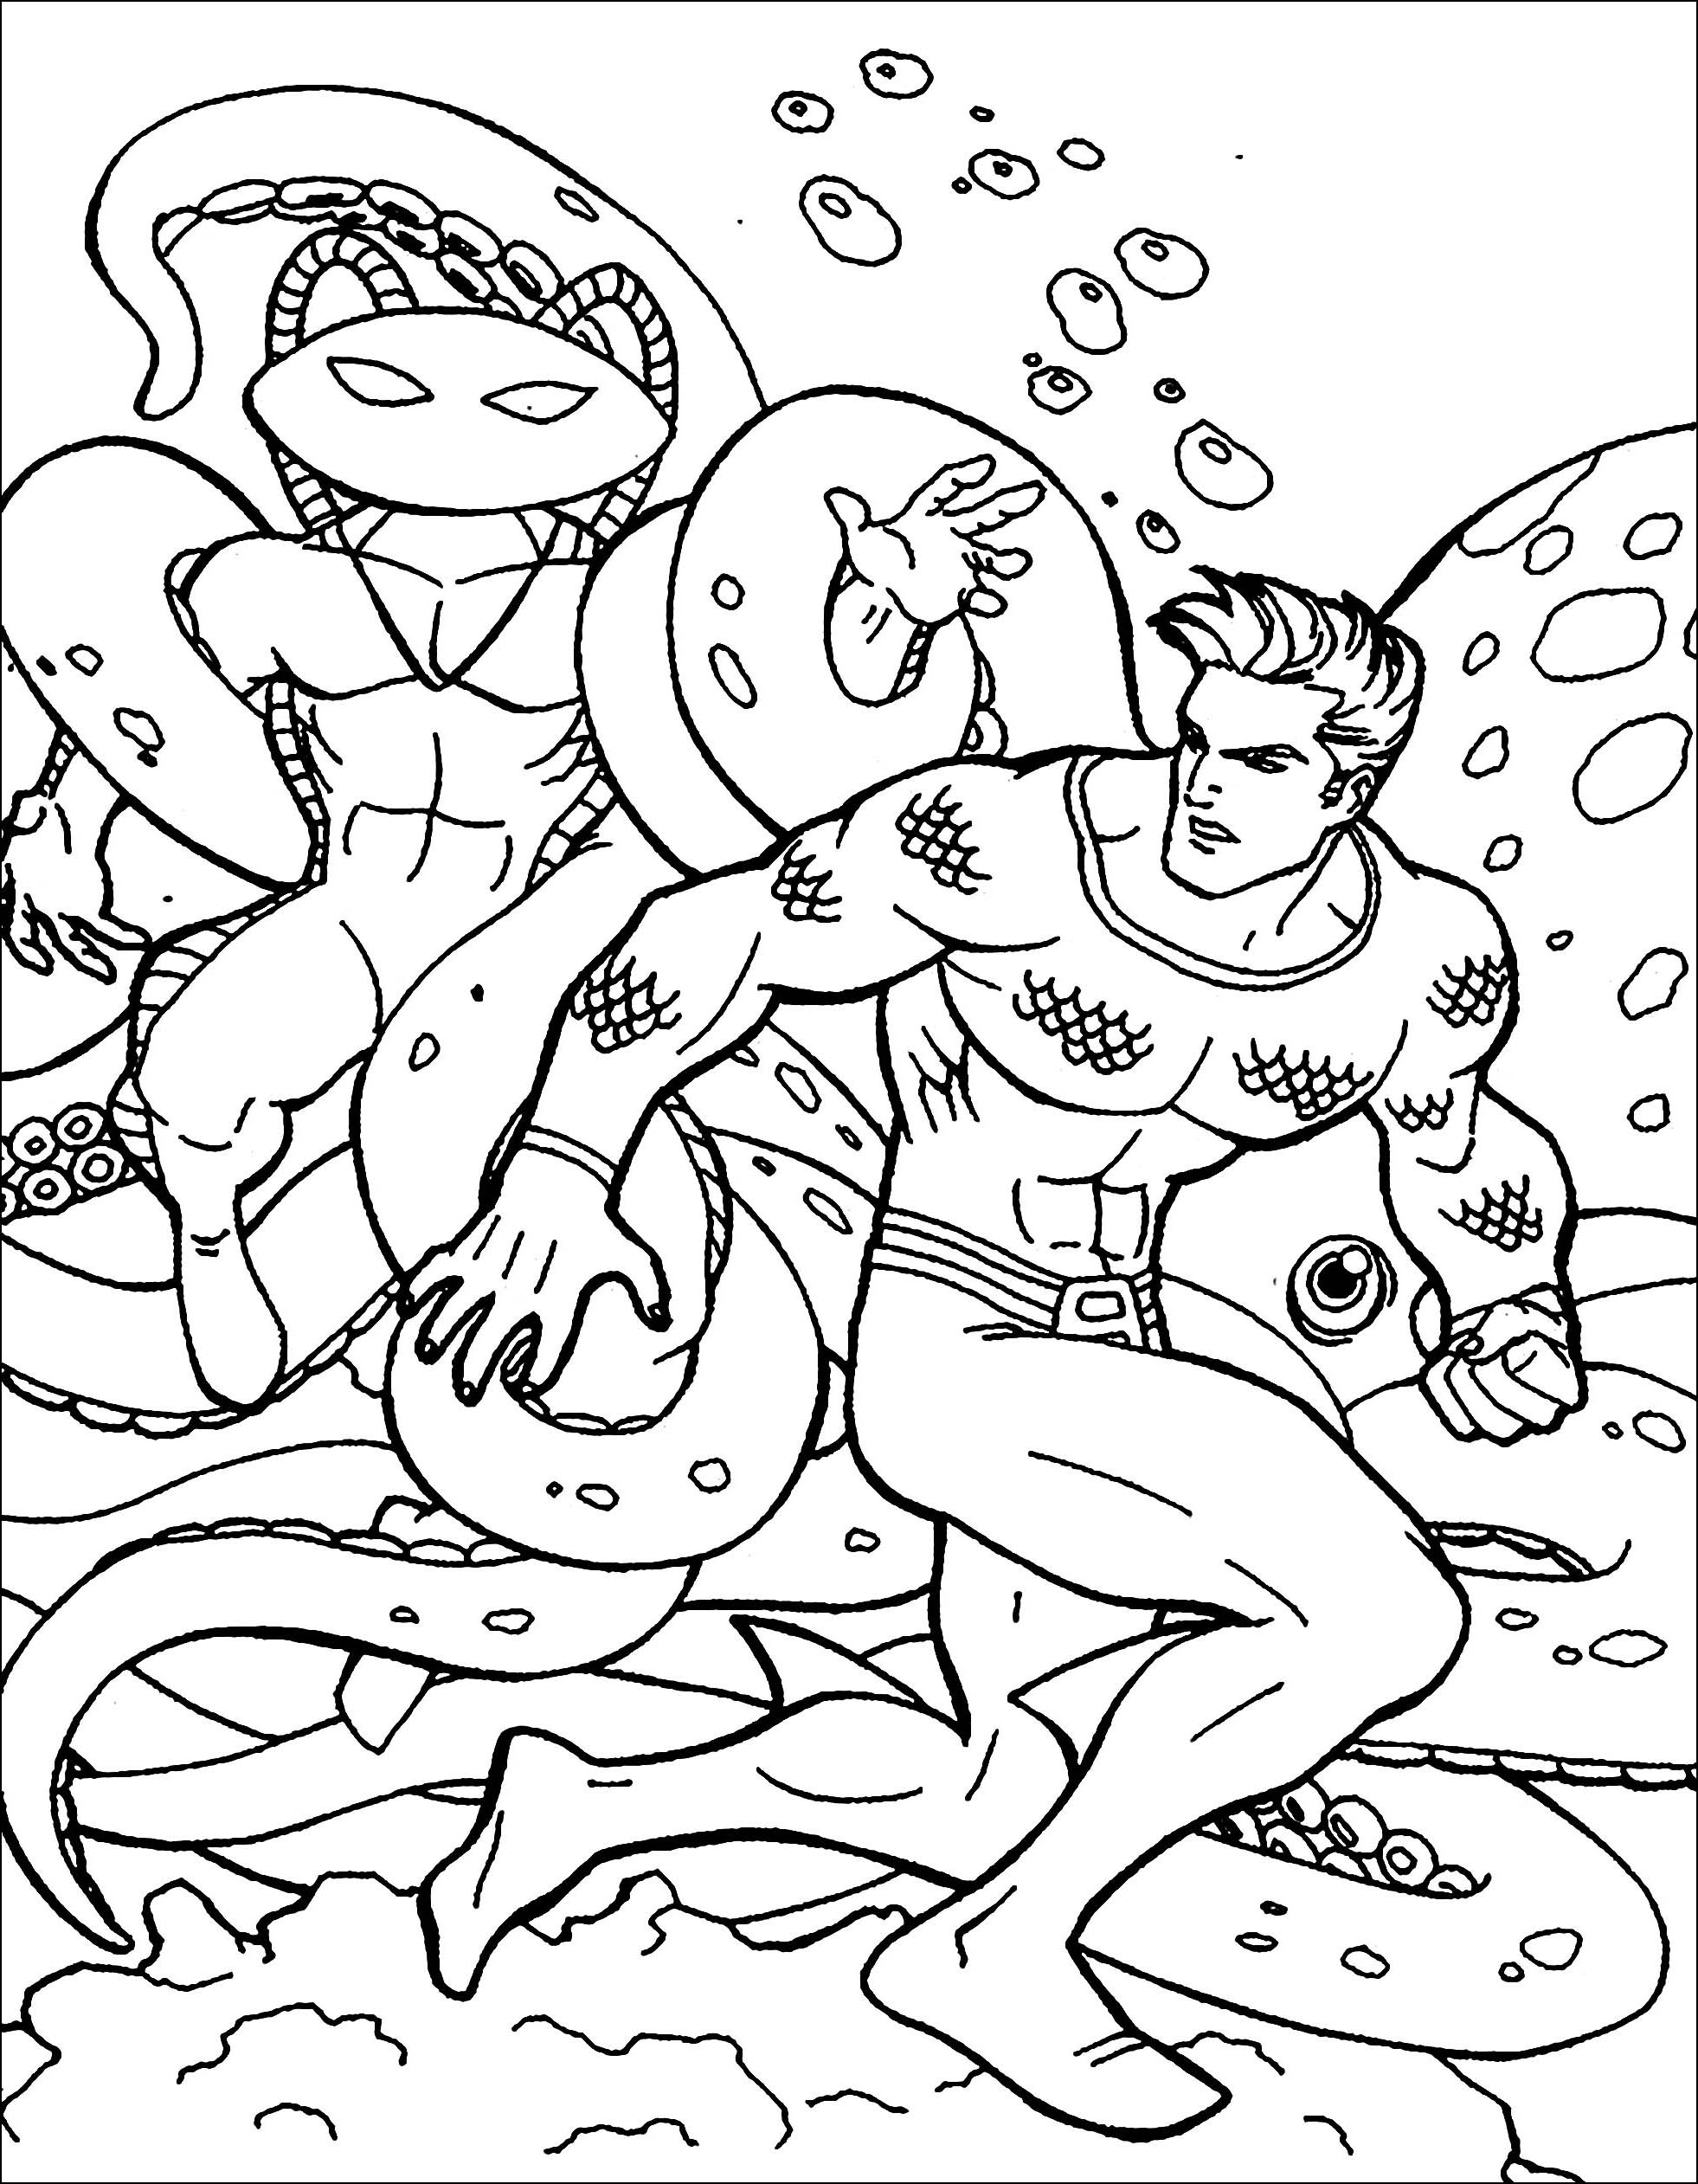 Simple Aquaman coloring page for children